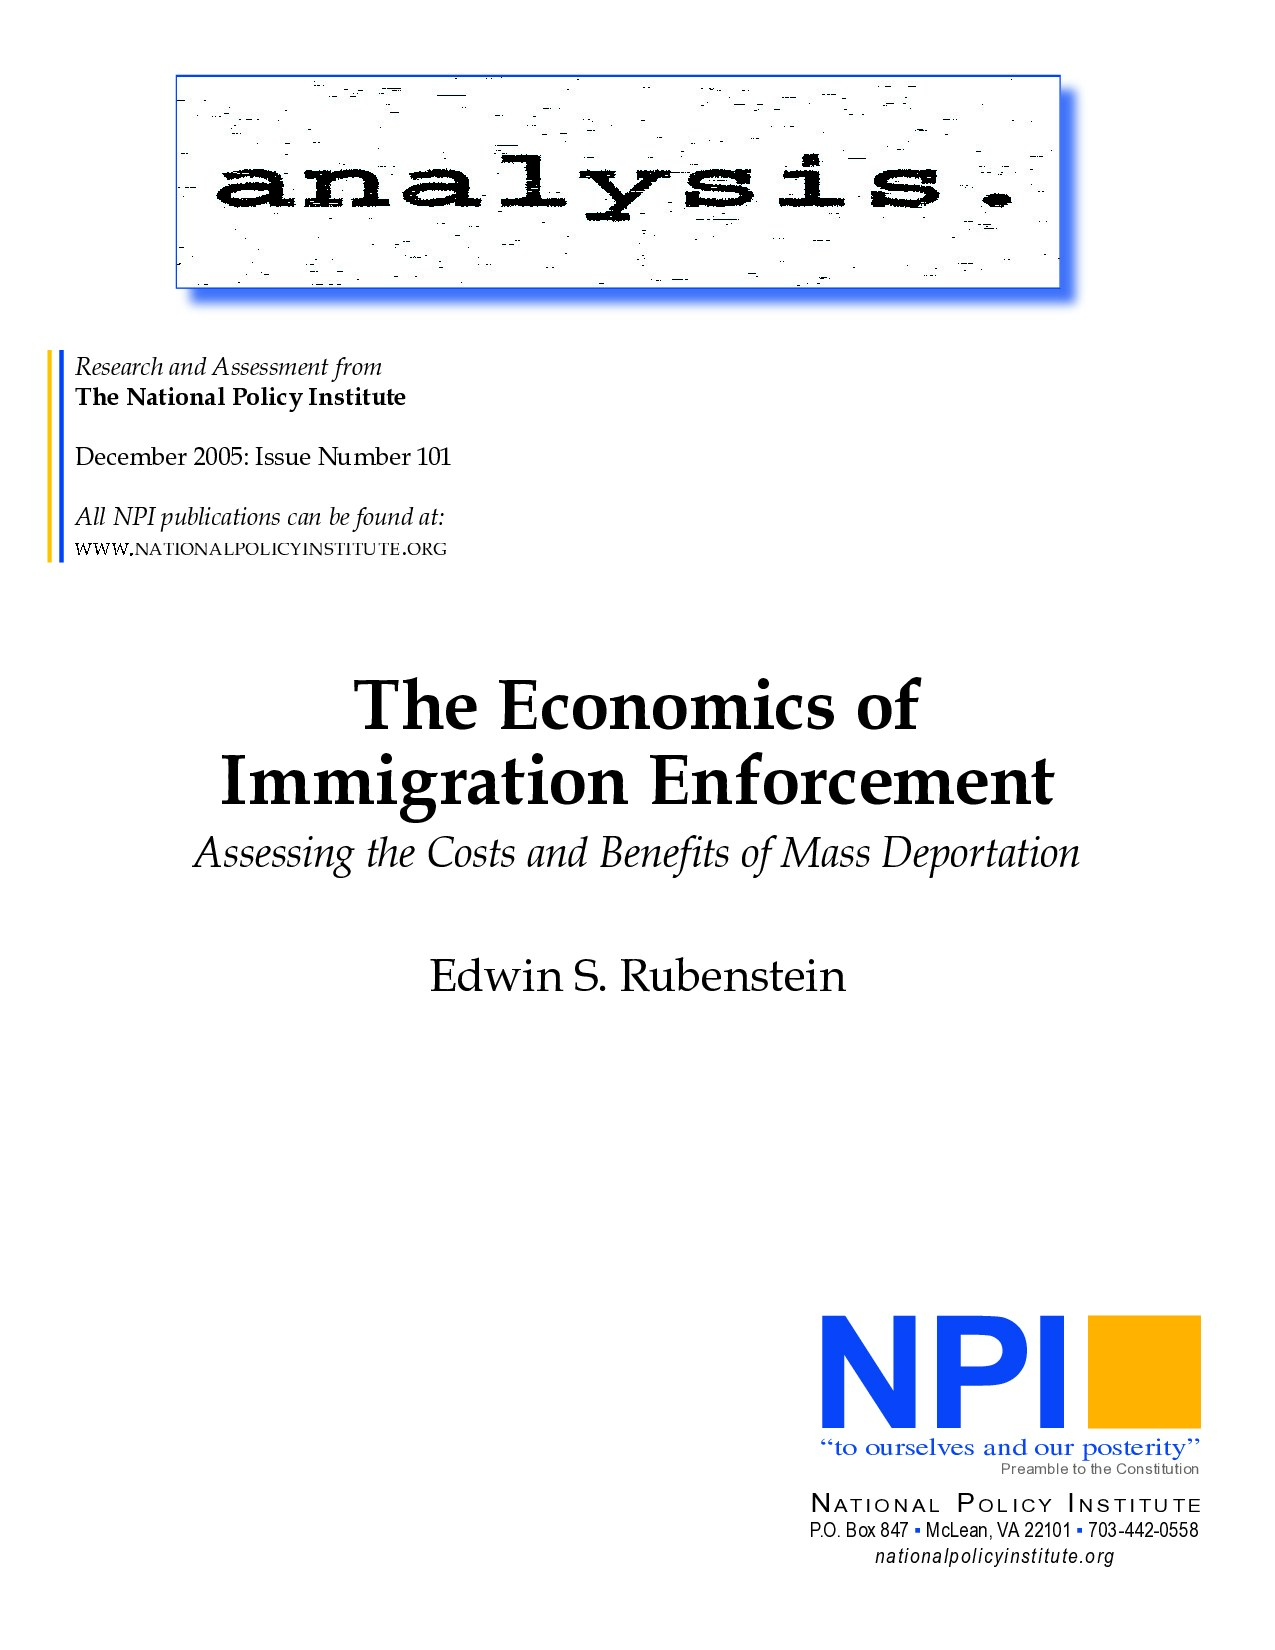 Rubenstein, Edwin S.; The Economics Of Immigration Enforcement - Assessing The Costs And Benefits Of Mass Deportation